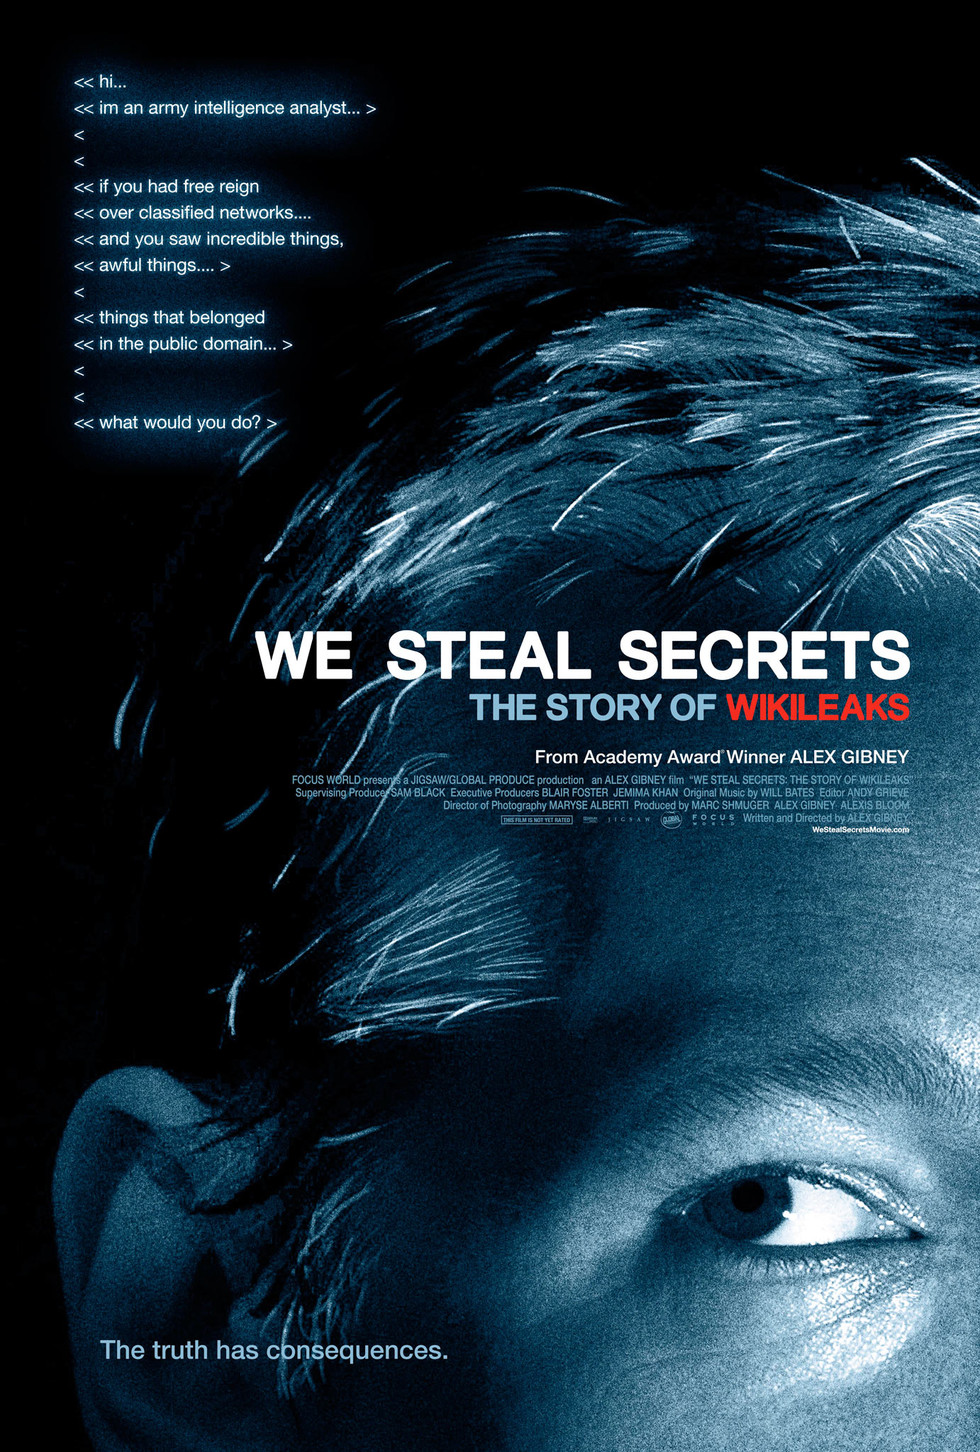 We Steal Secrets: The Story of WikiLeaks - Movie Poster #1 (Large)